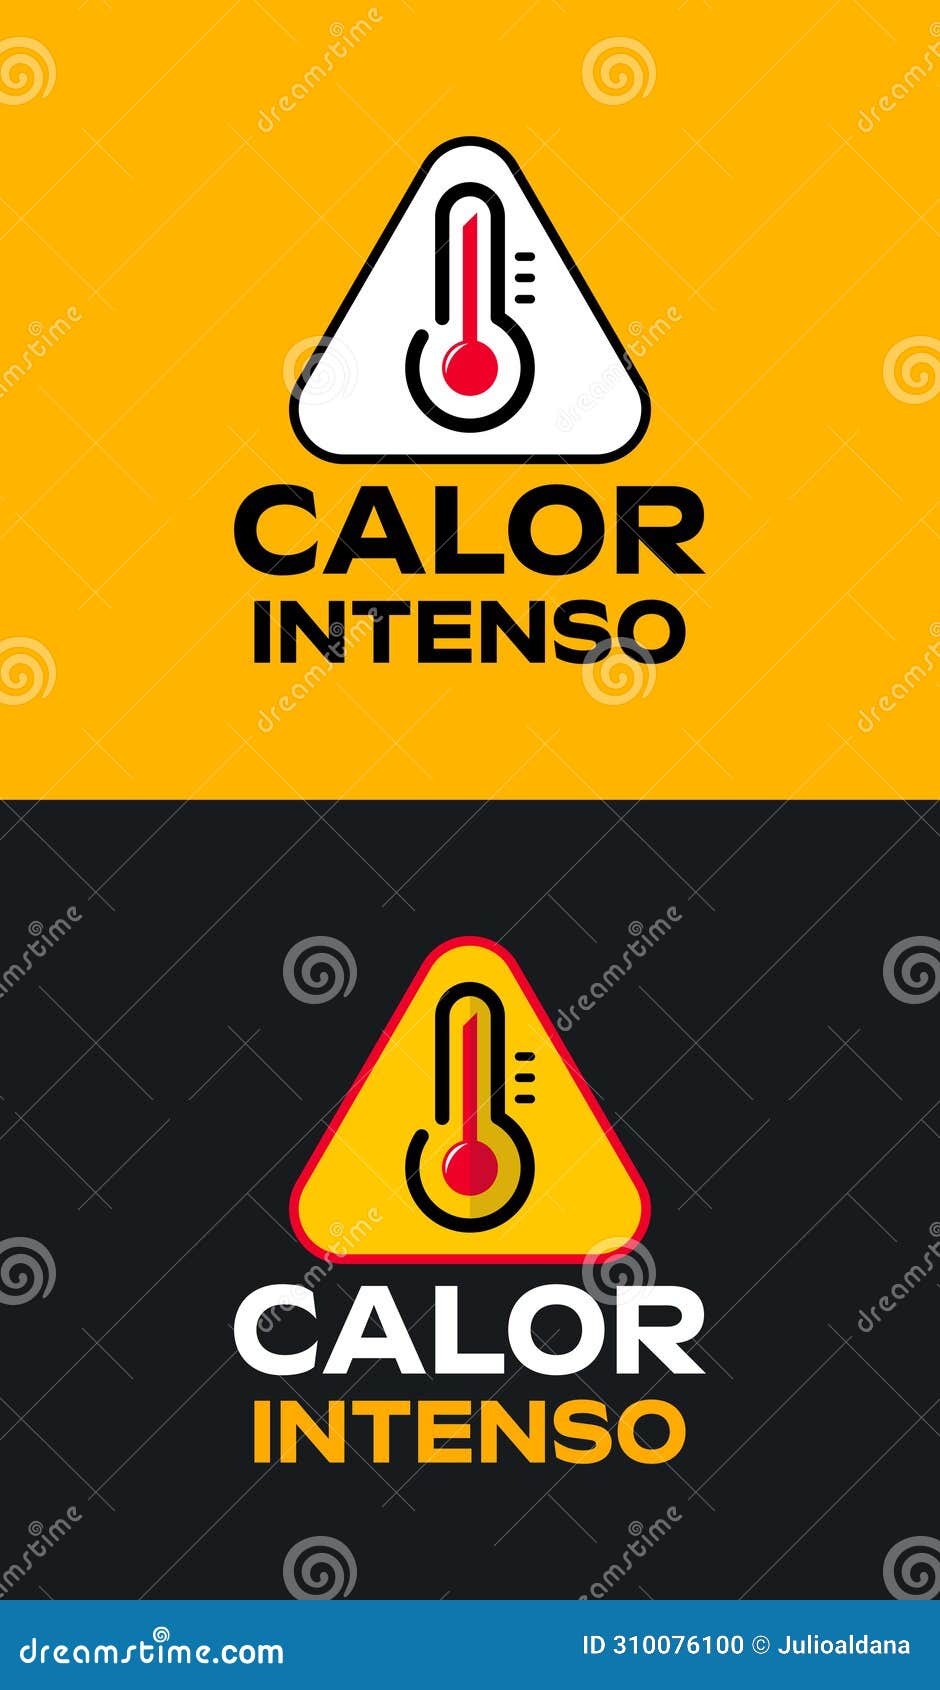 calor intenso, intense heat spanish text,  weather warning sign 